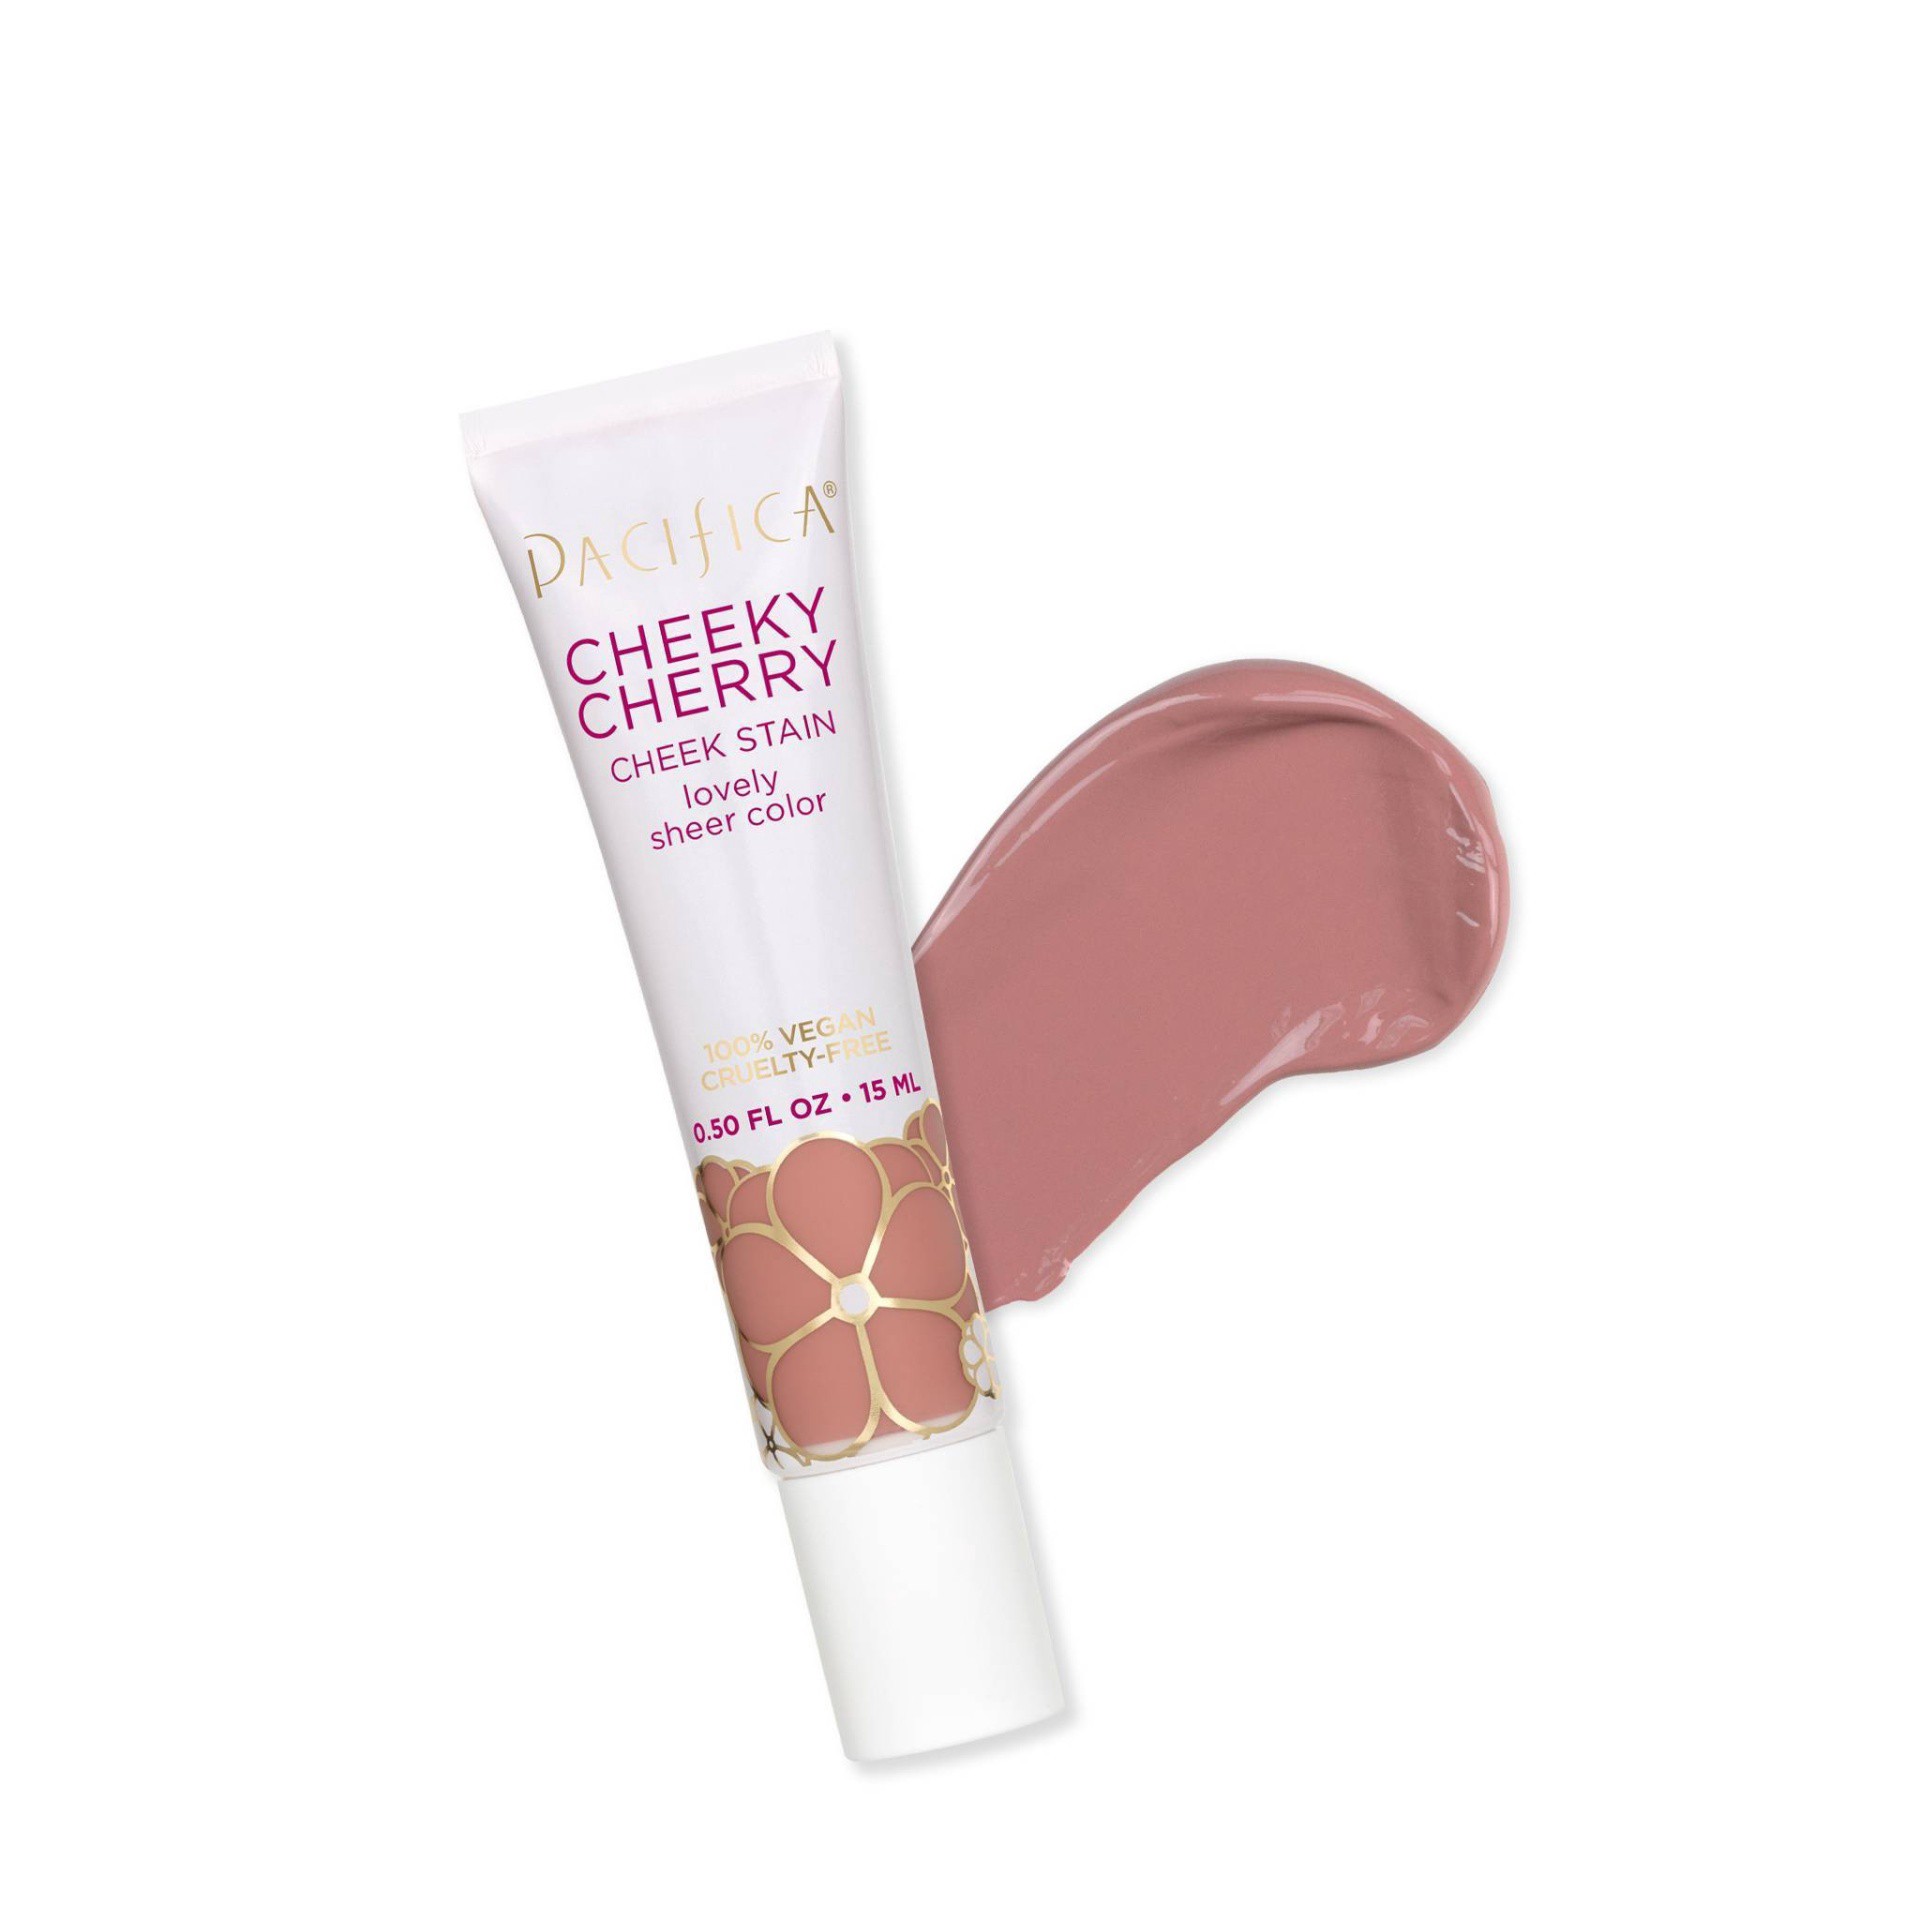 slide 1 of 5, Pacificachky Chrry Cheek Stain Cherry Baby, 0.5 fl oz